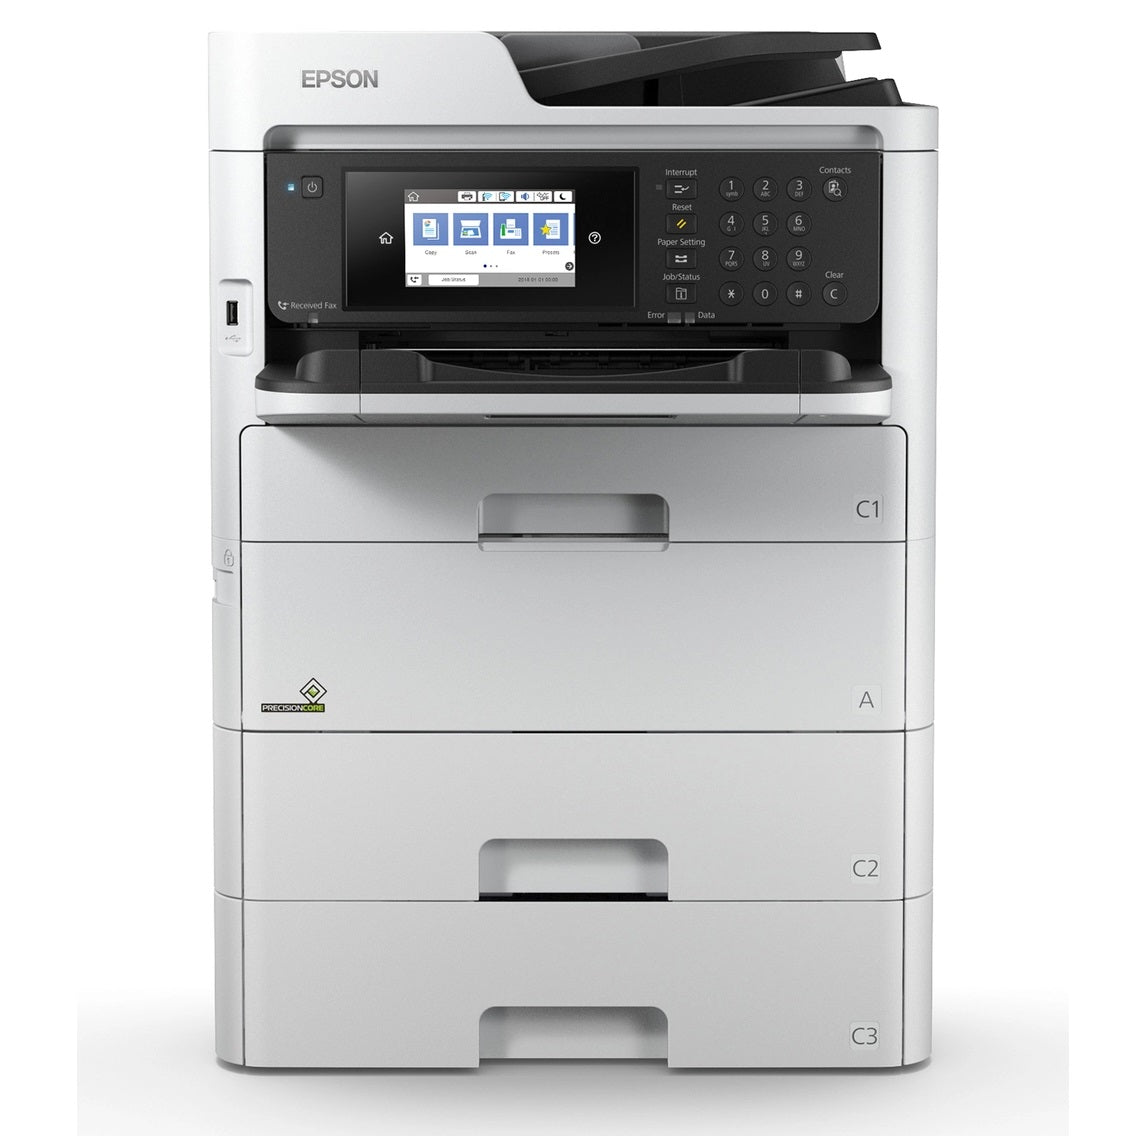 New Model Epson WorkForce Pro WF-C579R Workgroup Color Inkjet Multifunction Printer With Fast Speeds And Low Printing Costs